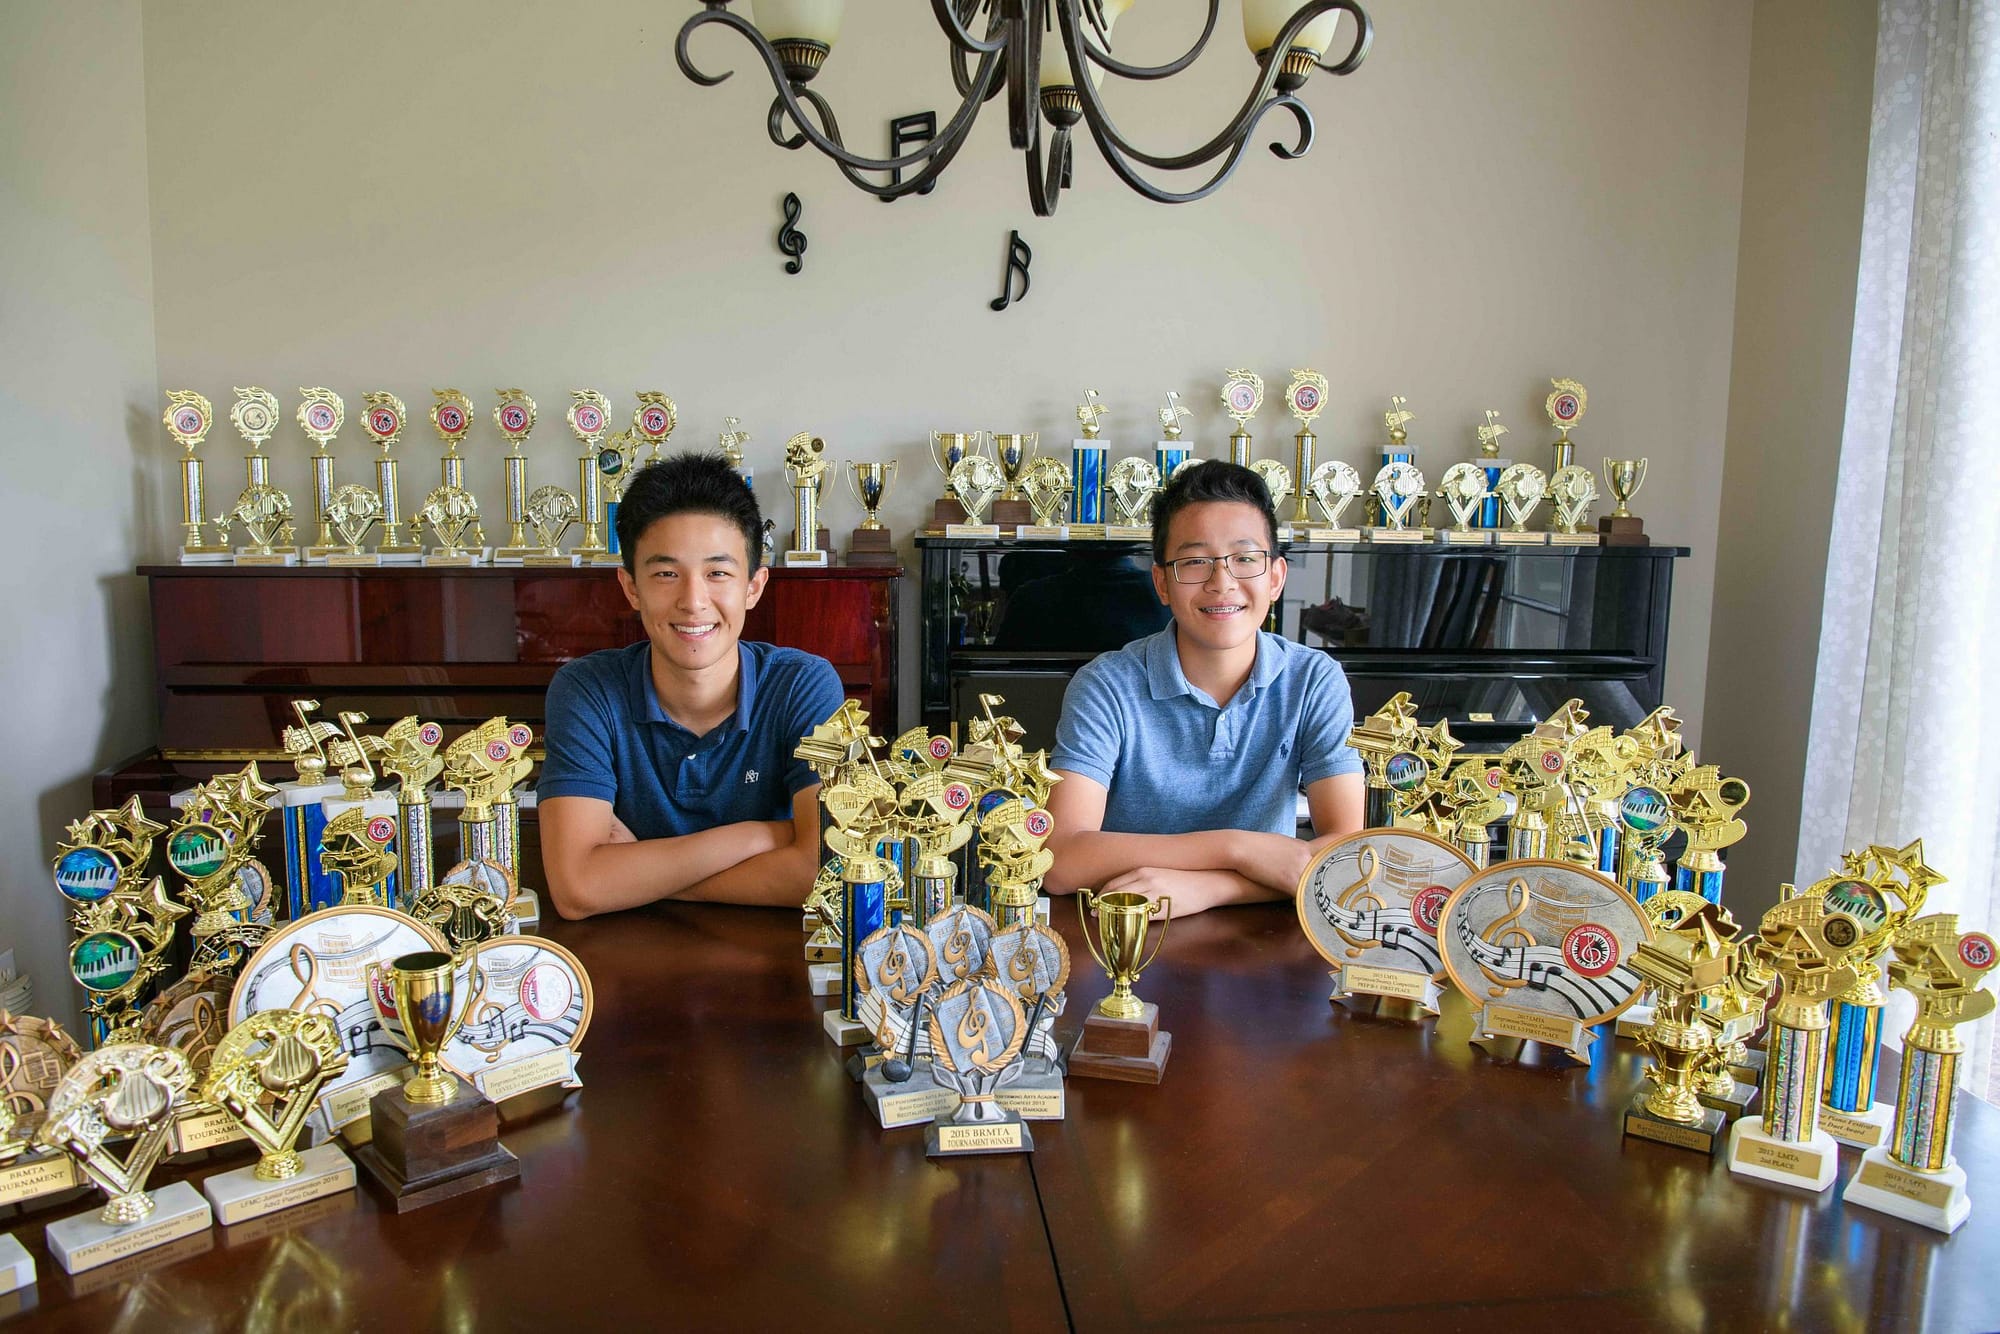 Piano students with trophies